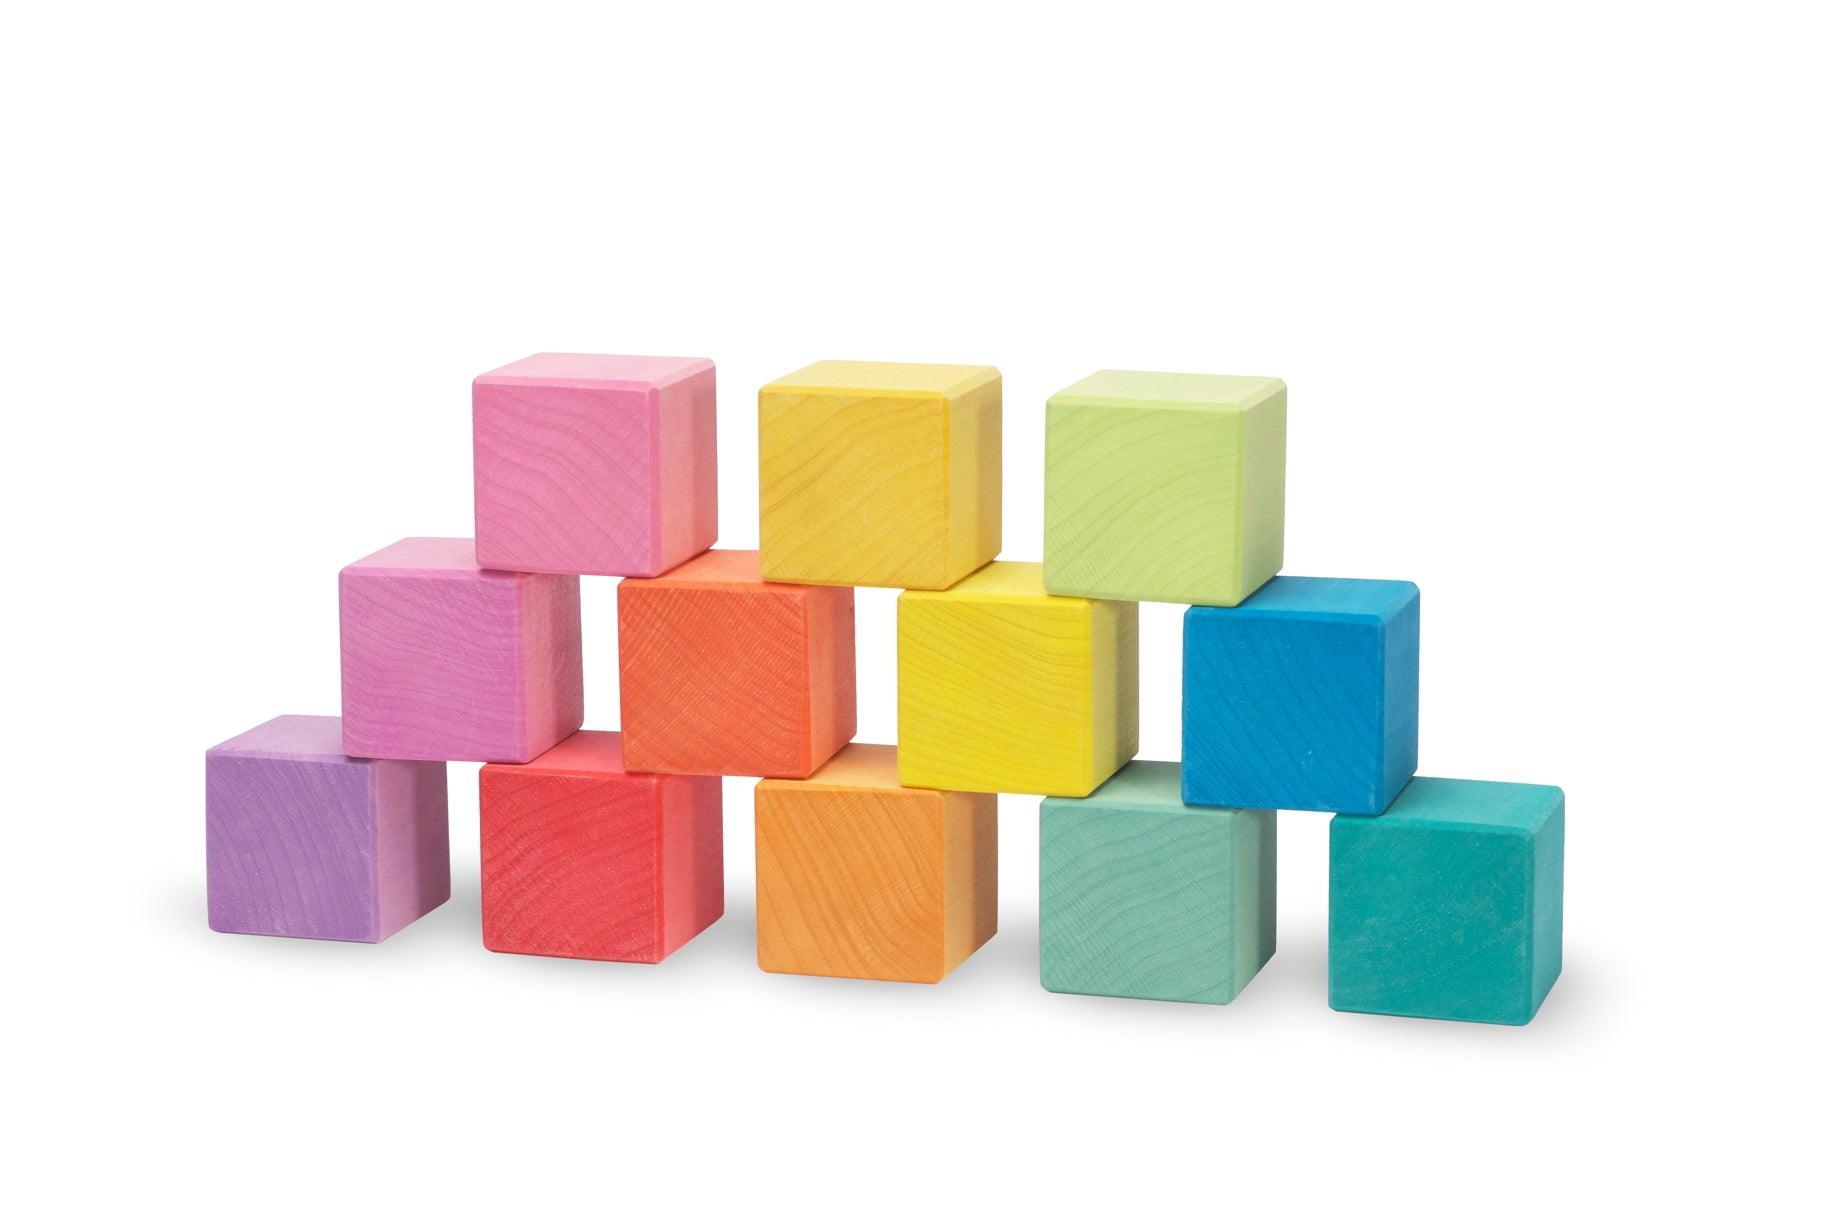 Ocamora - 'Cubos' 12 Colorful Cube Blocks - Why and Whale